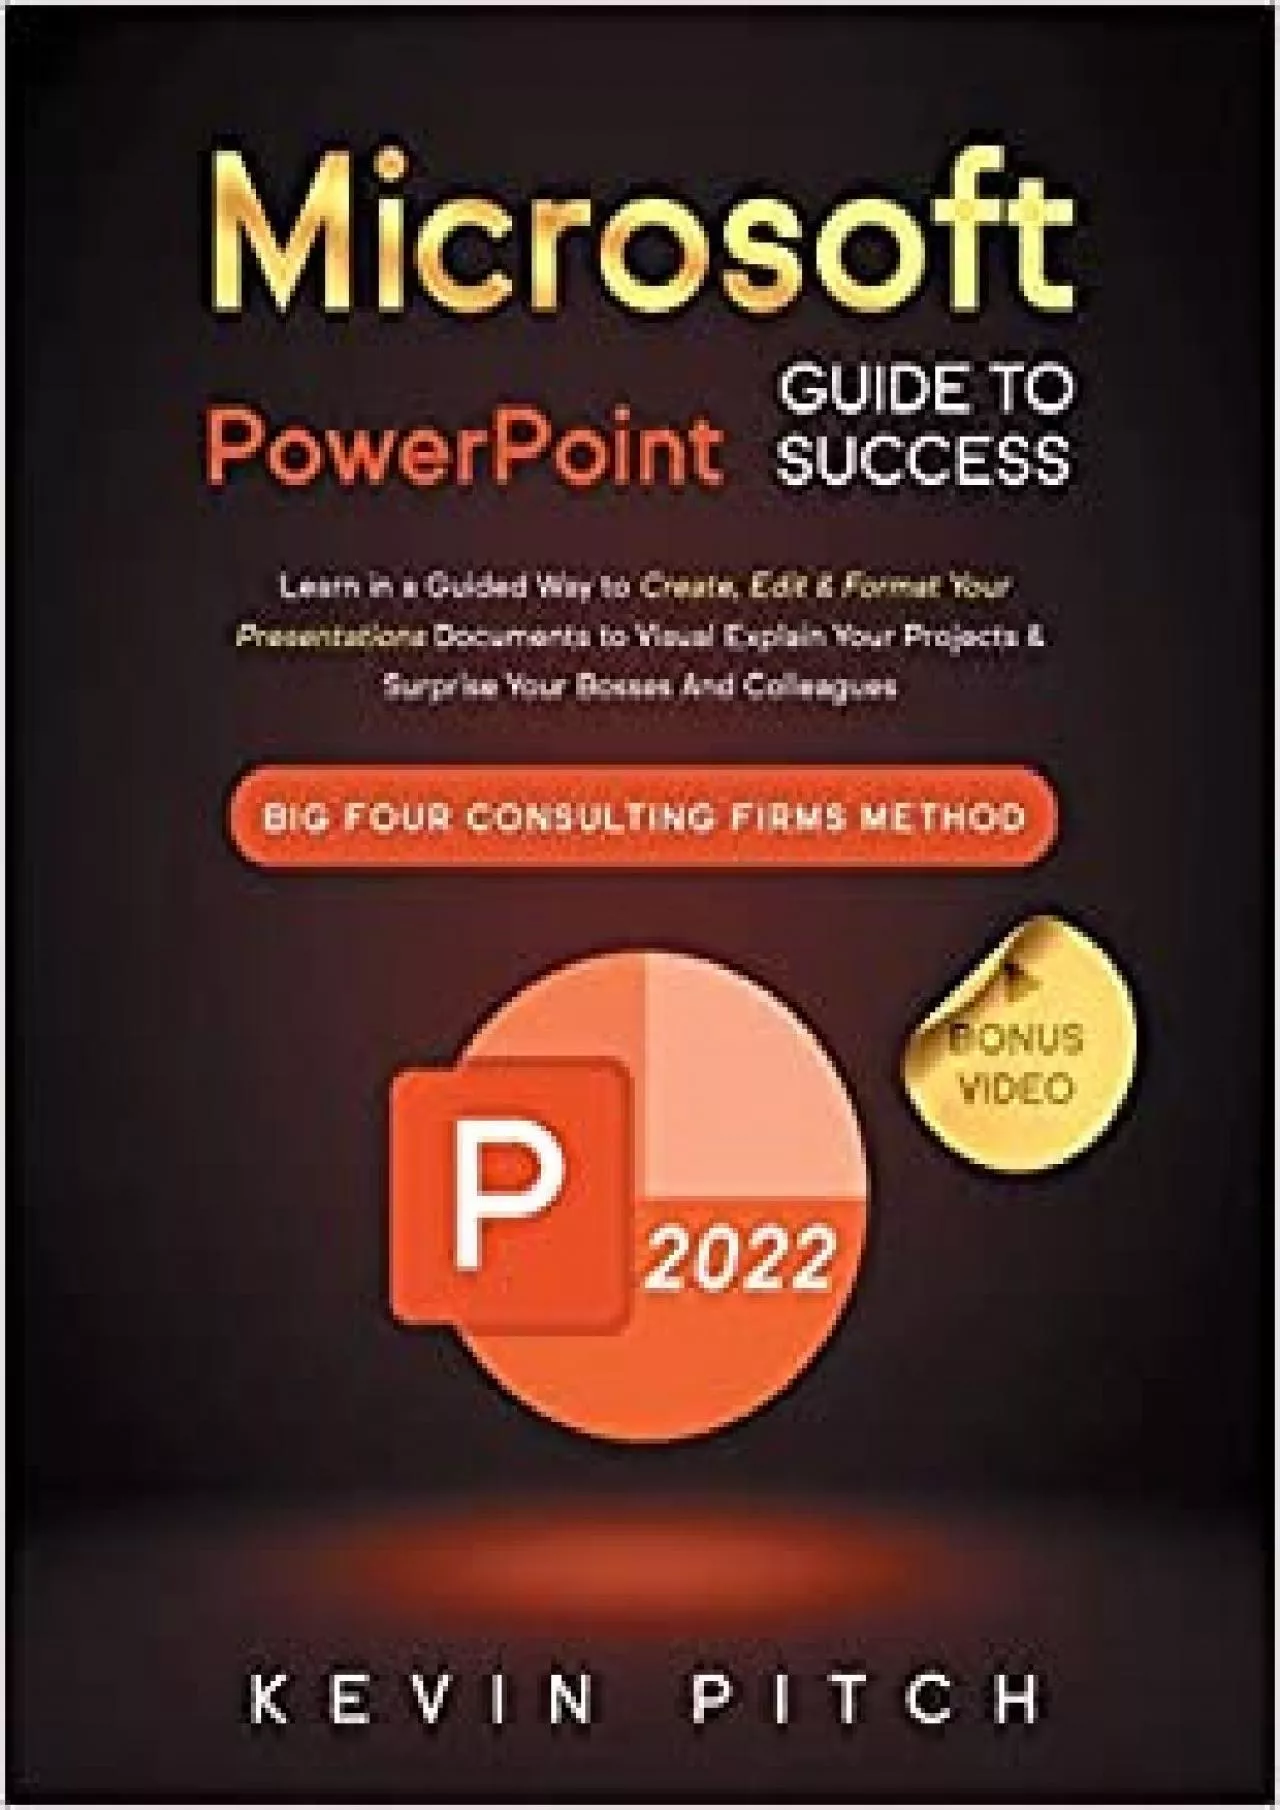 Microsoft PowerPoint Guide for Success: Learn in a Guided Way to Create, Edit & Format